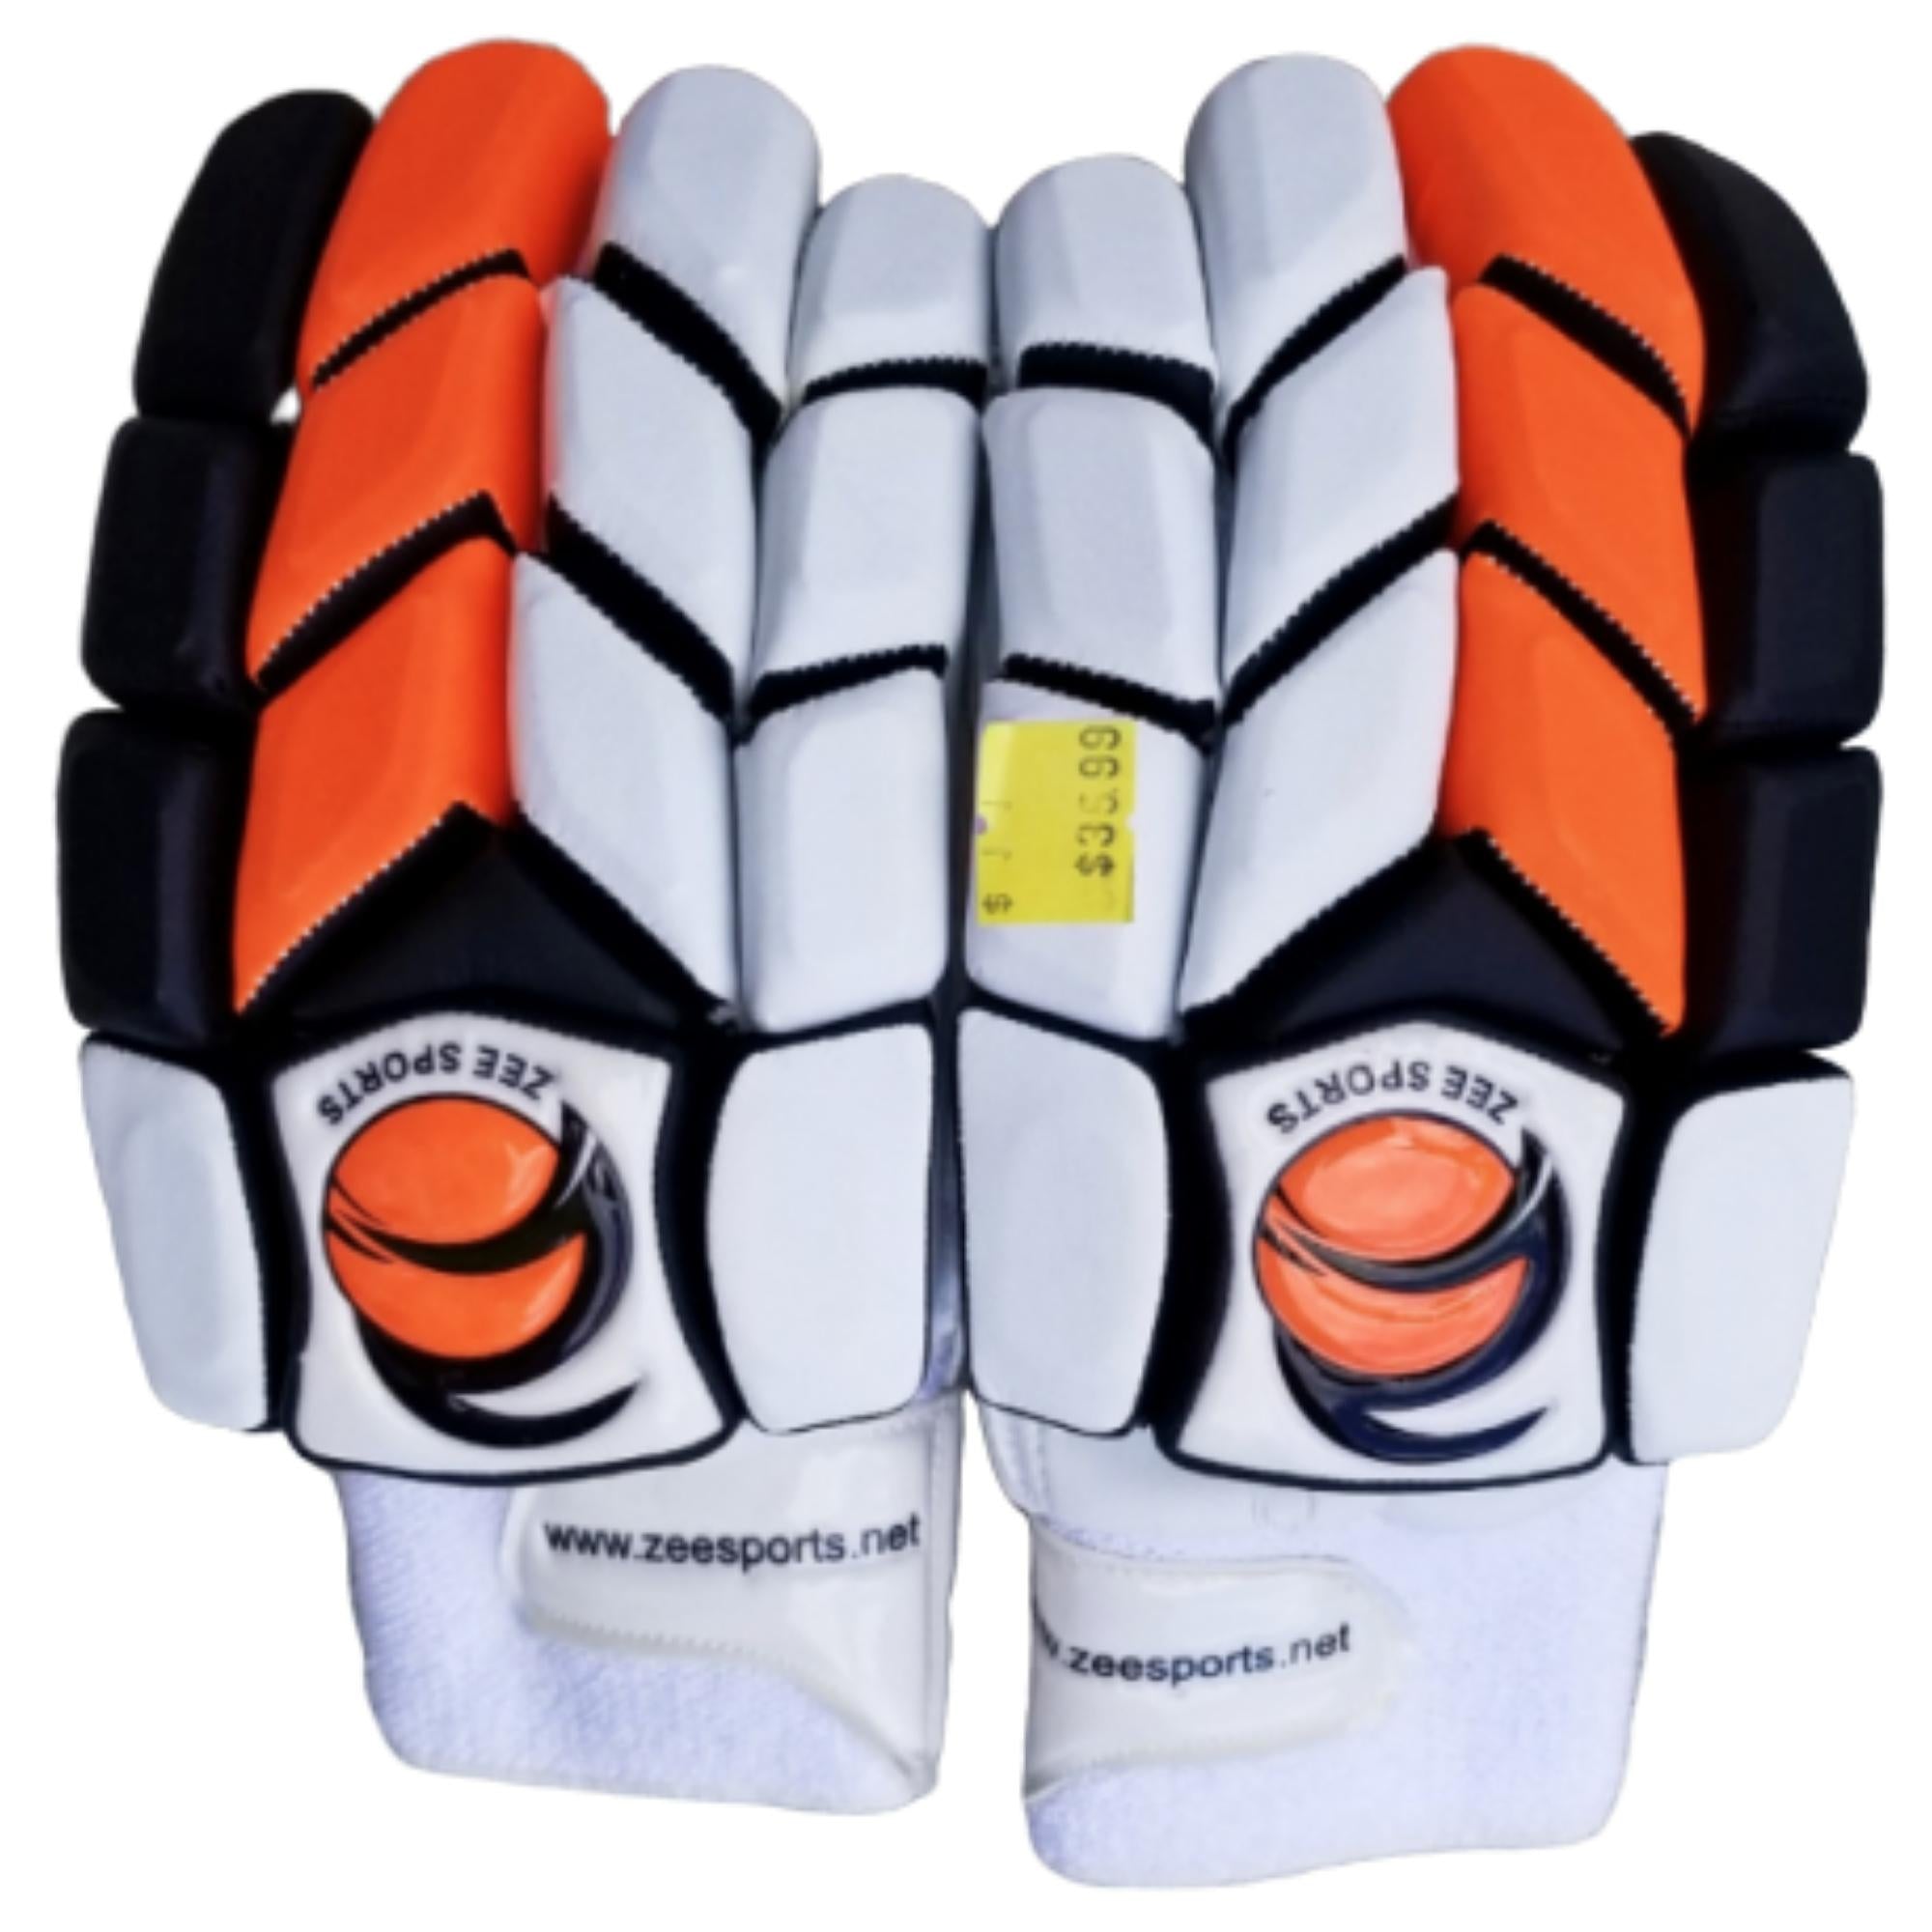 Zee Sports Youth Deluxe Batting Gloves